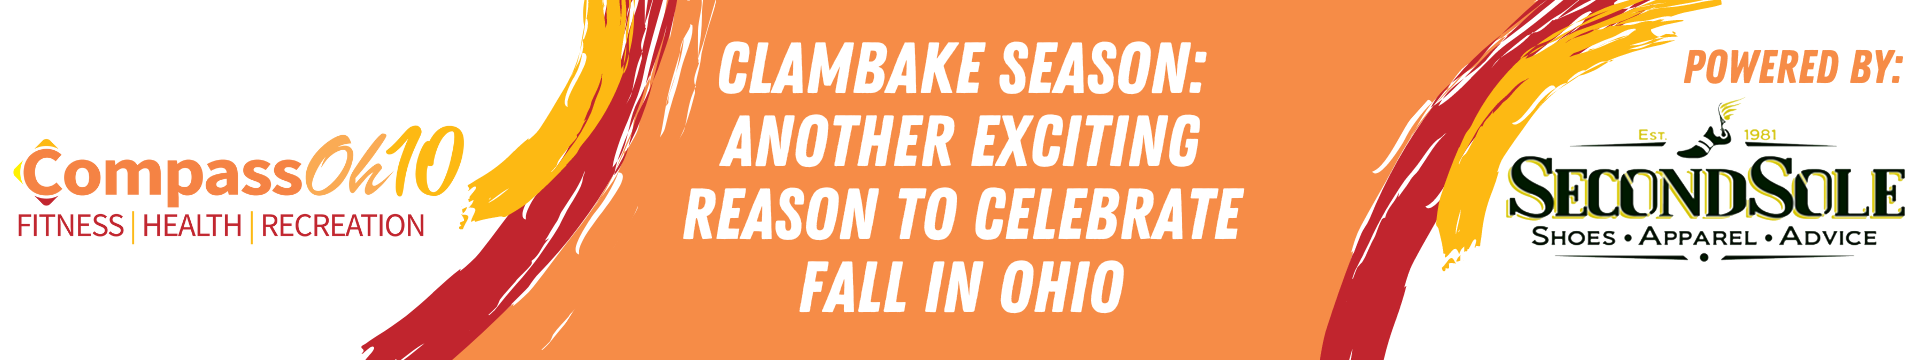 Clambake Season: Another Exciting Reason to Celebrate Fall in Ohio